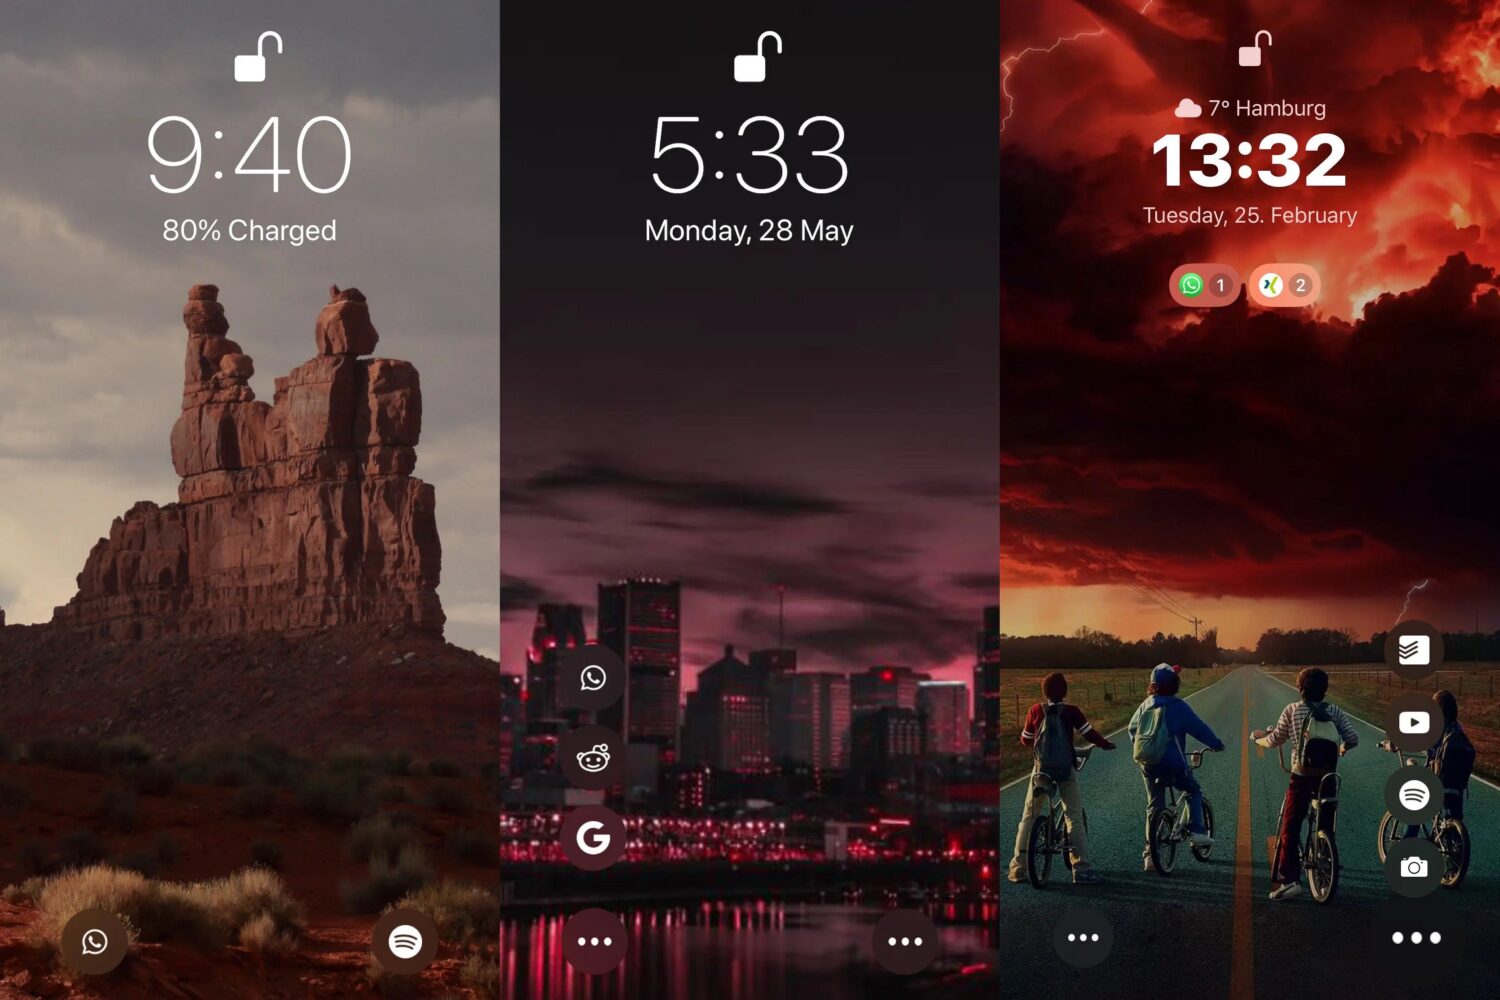 Jumper provides the ability to add custom app shortcuts to the Lock Screen.